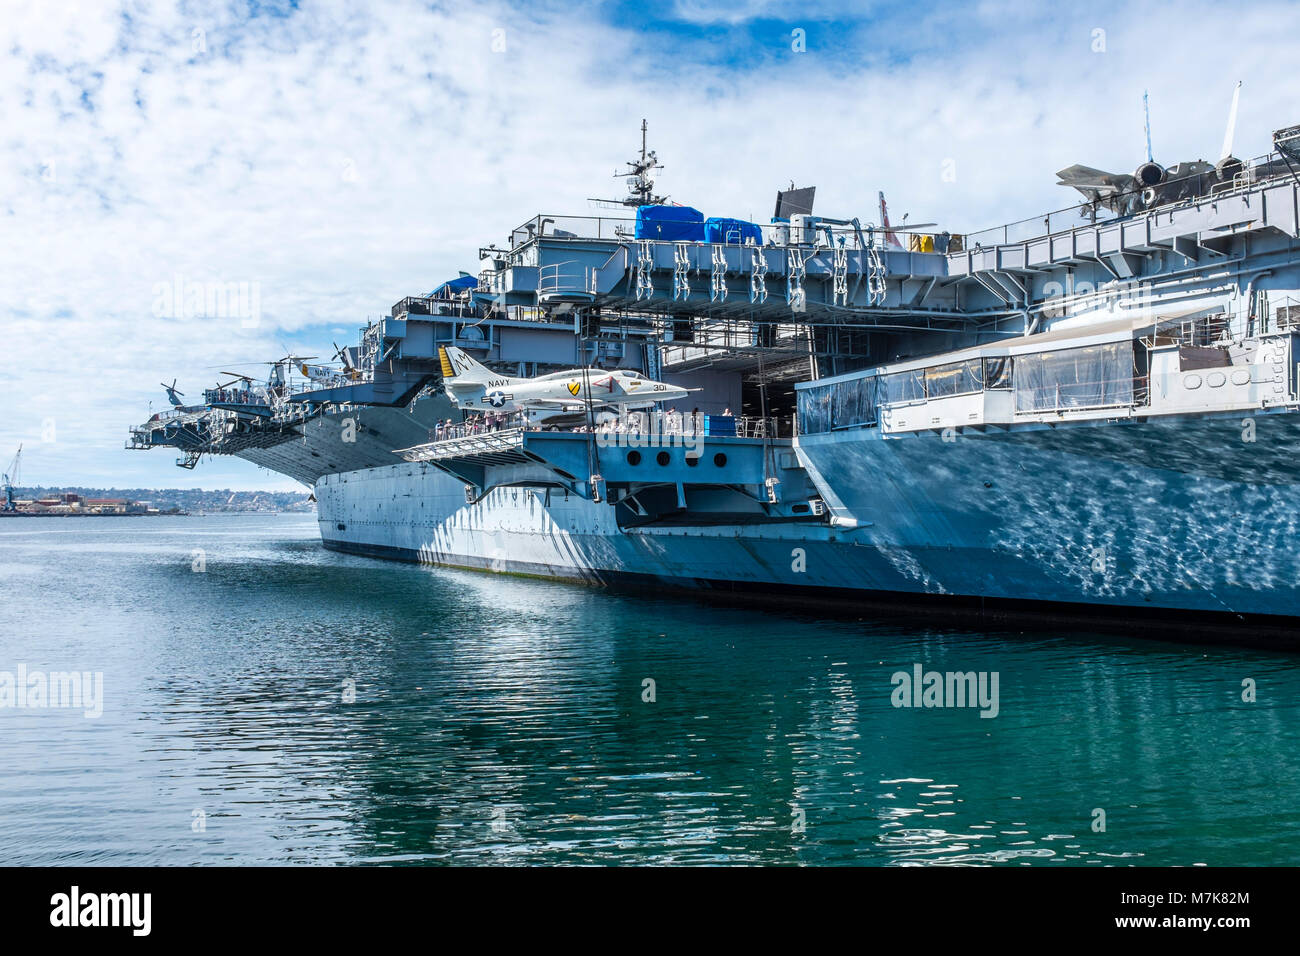 SAN DIEGO, CALIFORNIA, USA - USS Midway Aircraft Carrier and maritime museum berthed on the waterfront in downtown San Diego on Harbor Drive. Stock Photo